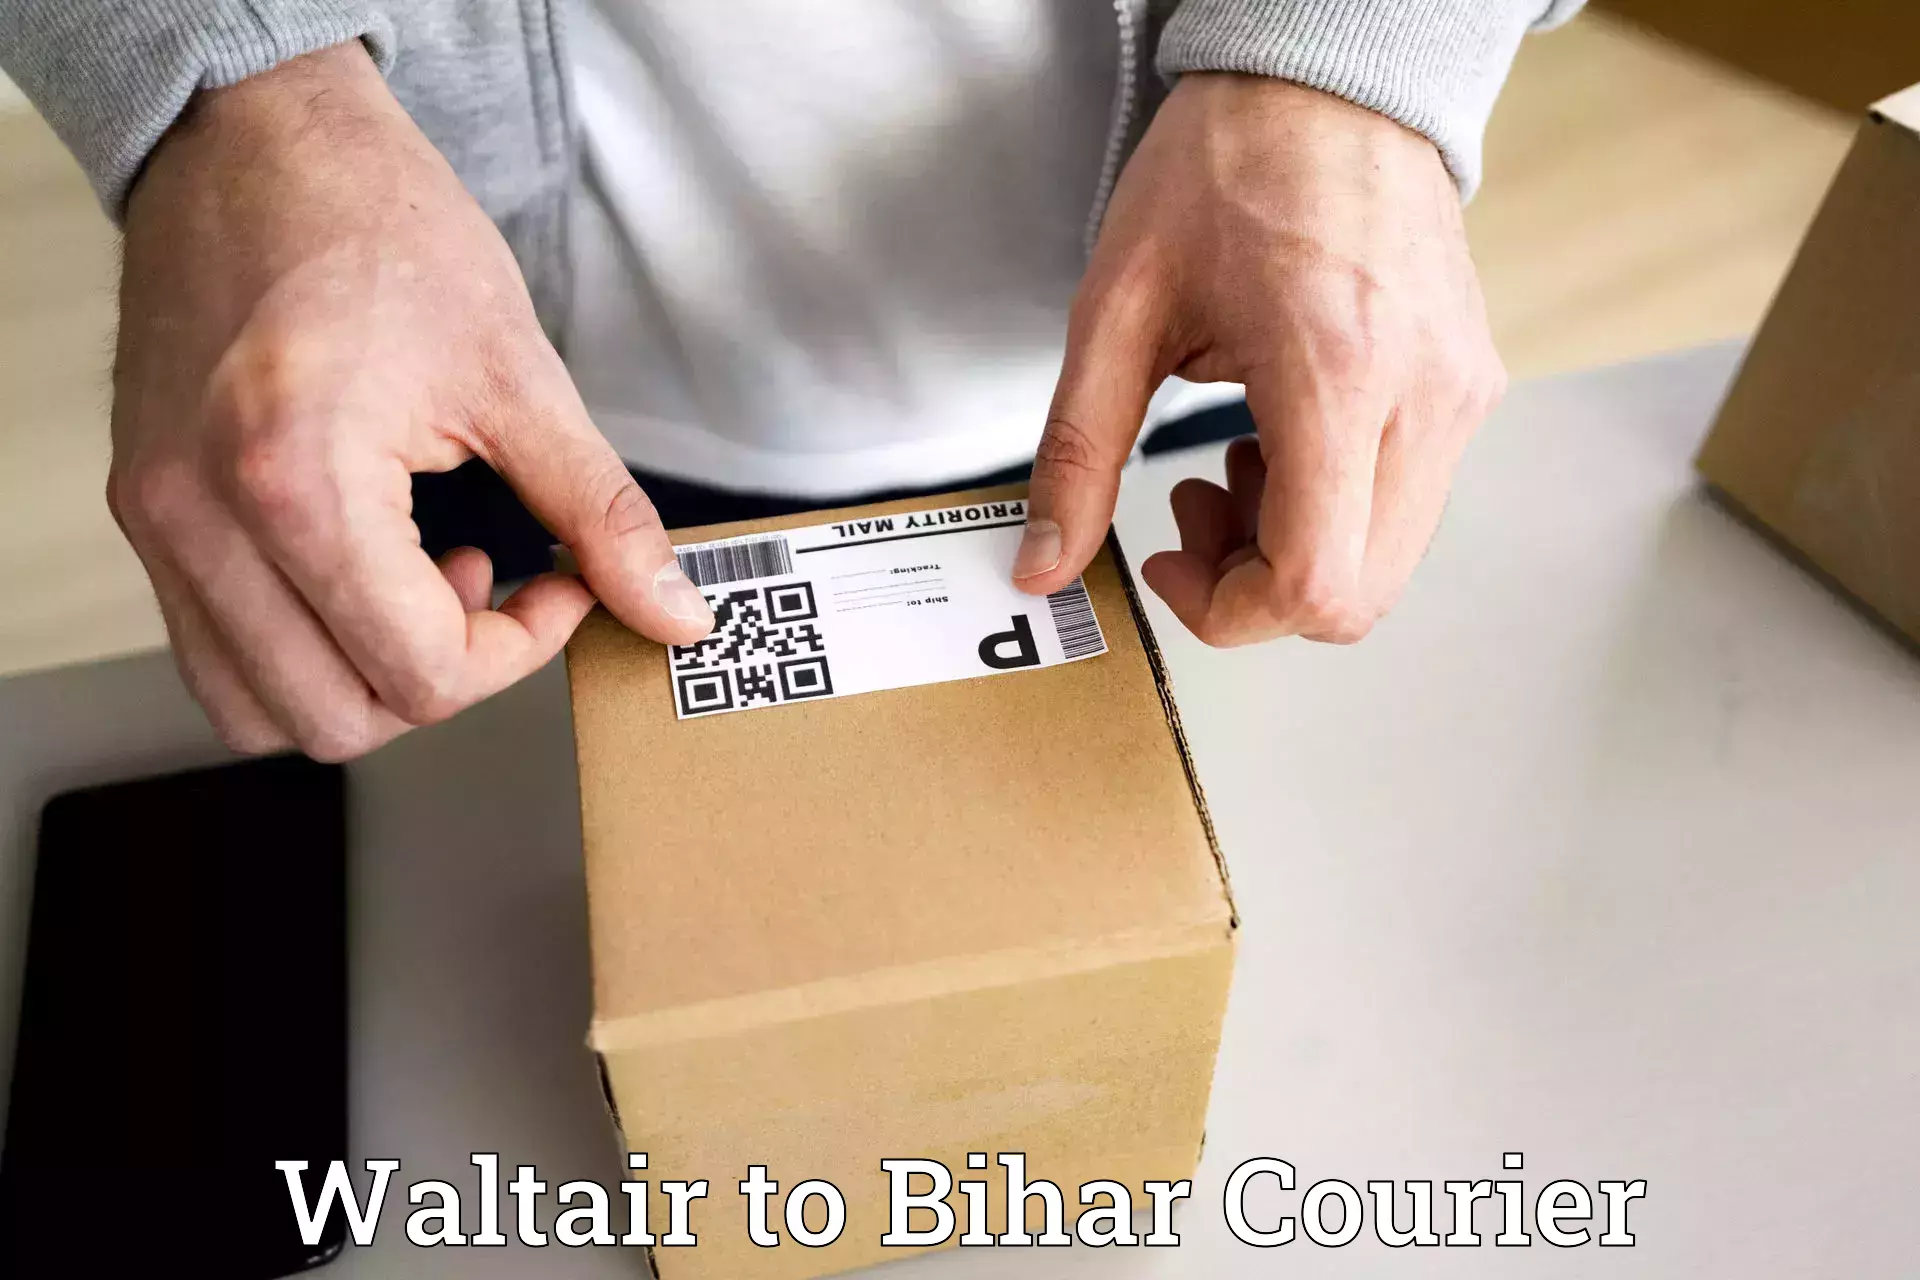 Large-scale shipping solutions Waltair to Hazrat Jandaha